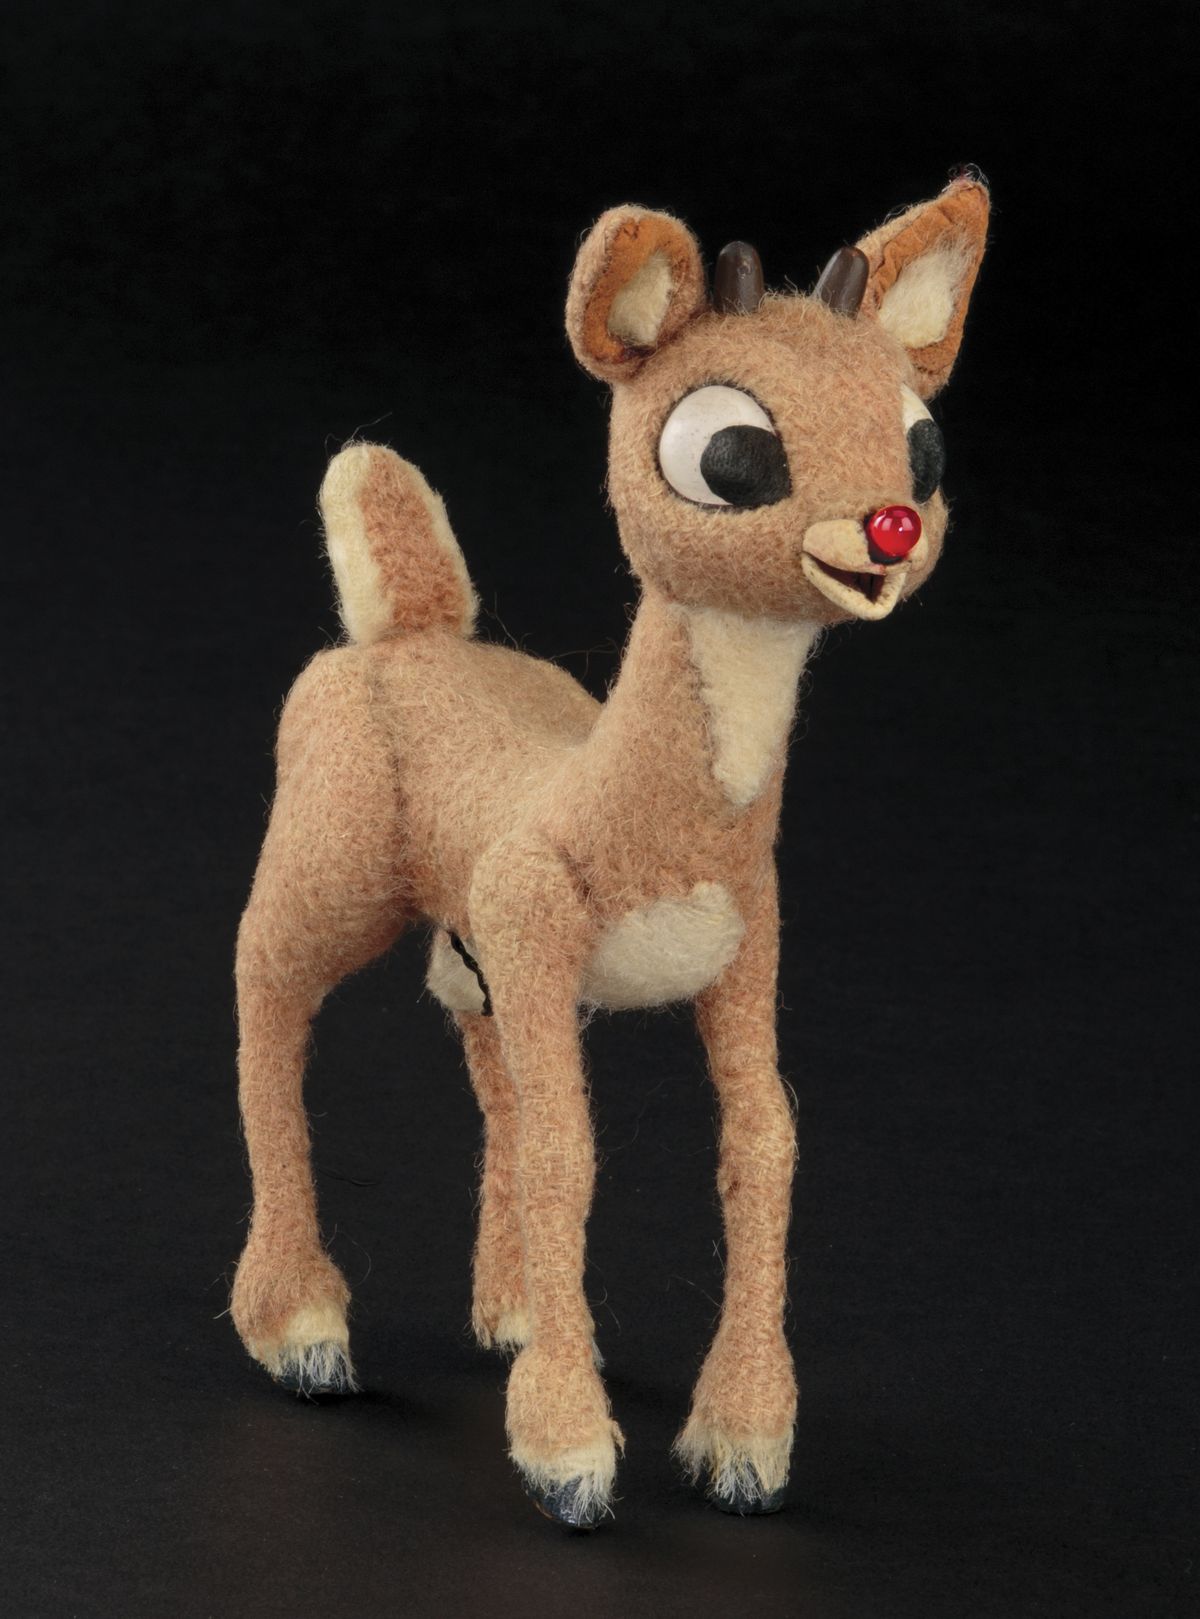 This image released by Profiles in History shows a Rudolph reindeer puppet used in the filming of the 1964 Christmas special “Rudolph the Red-Nosed Reindeer.” The soaring reindeer and Santa Claus figures who starred in in the perennially beloved stop-motion animation Christmas special “Rudolph the Red Nosed Reindeer” are going up for auction.Auction house Profiles in History announced Thursday that a 6-inch-tall Rudolph and 11-inch-tall Santa used to animate the 1964 TV special are being sold together in the auction that starts Nov. 13 and are expected to fetch between $150,000 and $250,000.  (HONS)